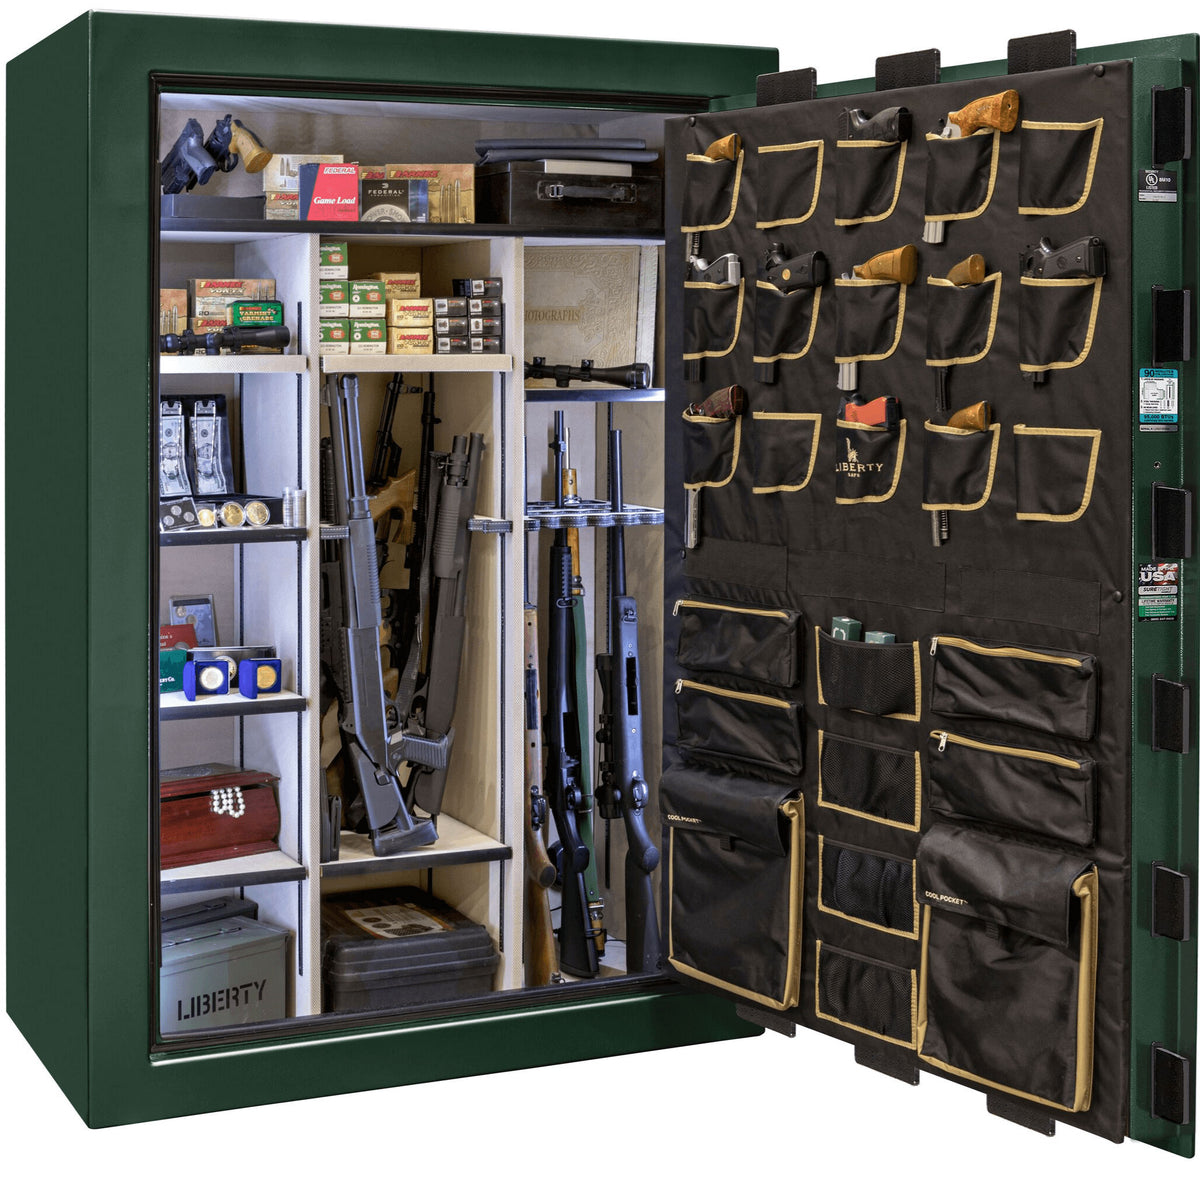 Liberty Classic Select Extreme Wide Body Safe in Green Gloss, open.